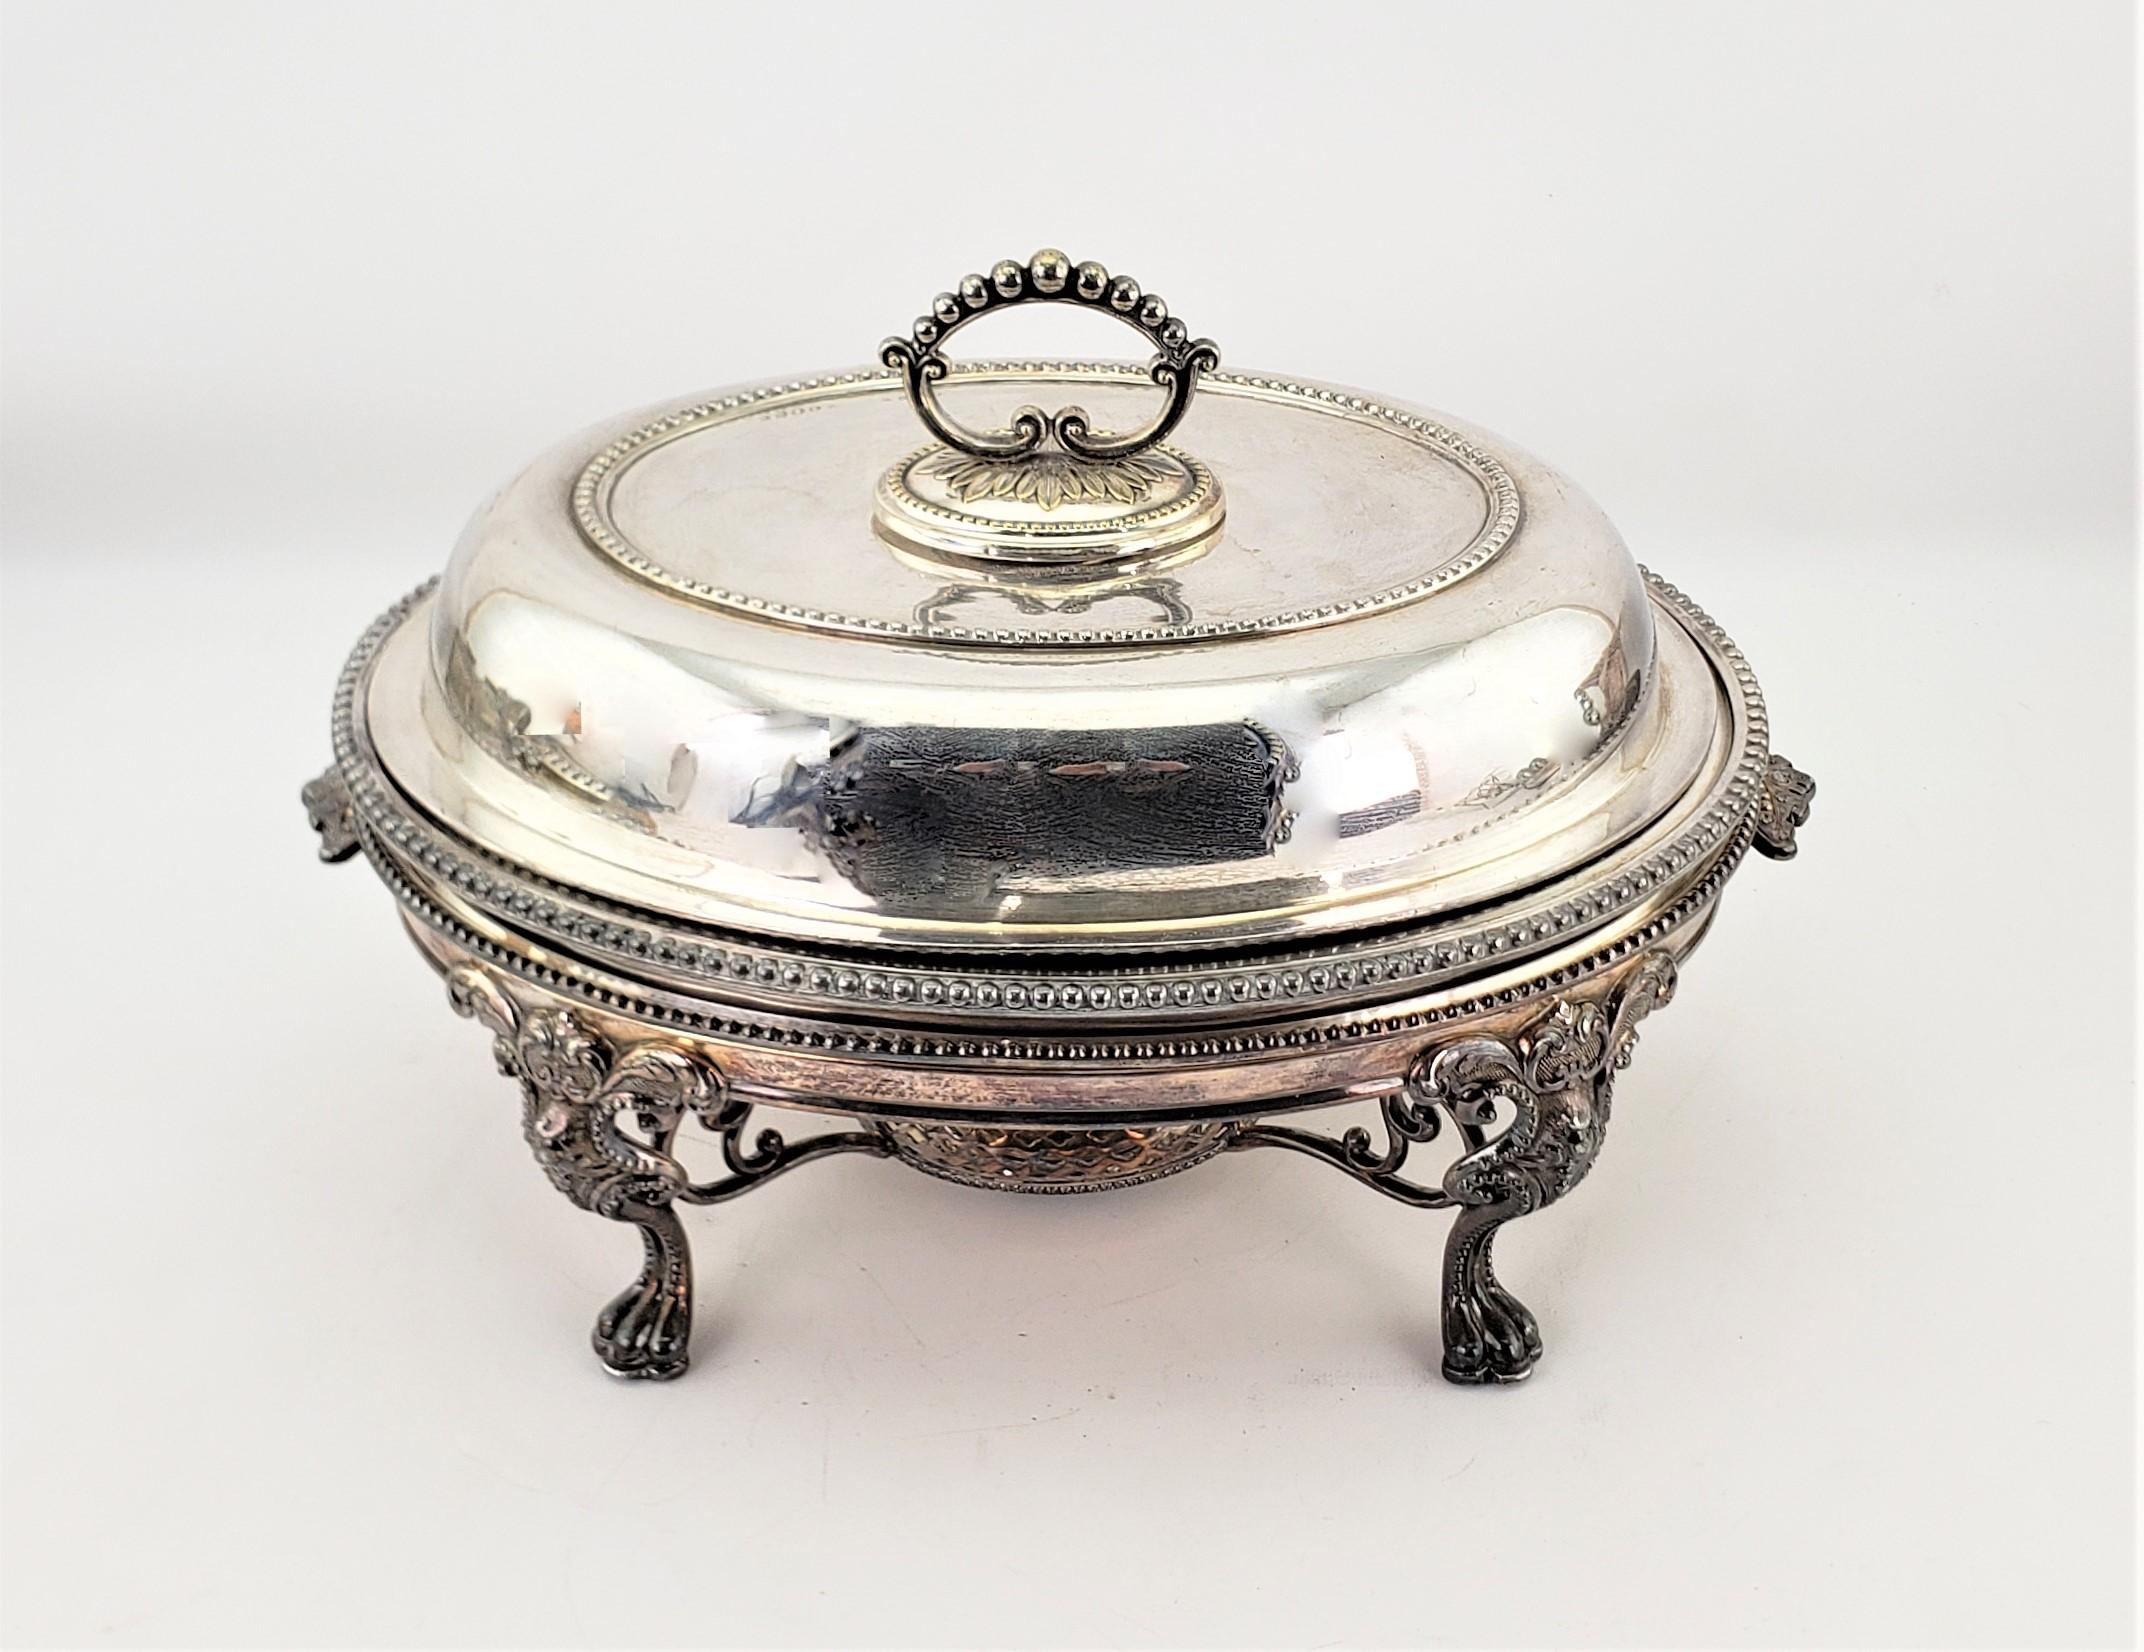 Edwardian Antique Reed & Barton Silver Plated Covered Warm Food Server or Chafing Dish